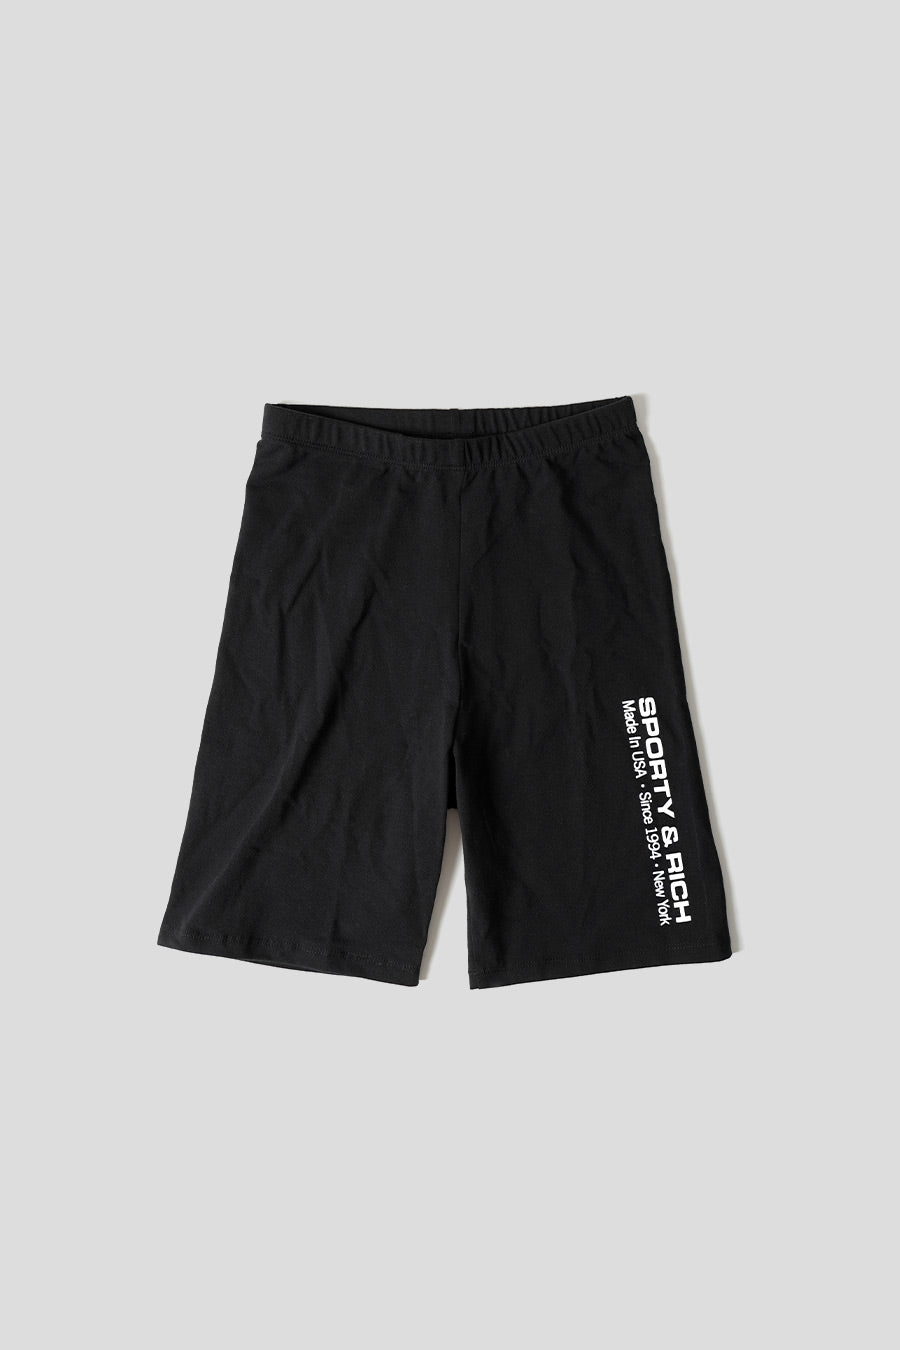 Sporty & Rich - SHORT MADE IN USA NOIR - LE LABO STORE